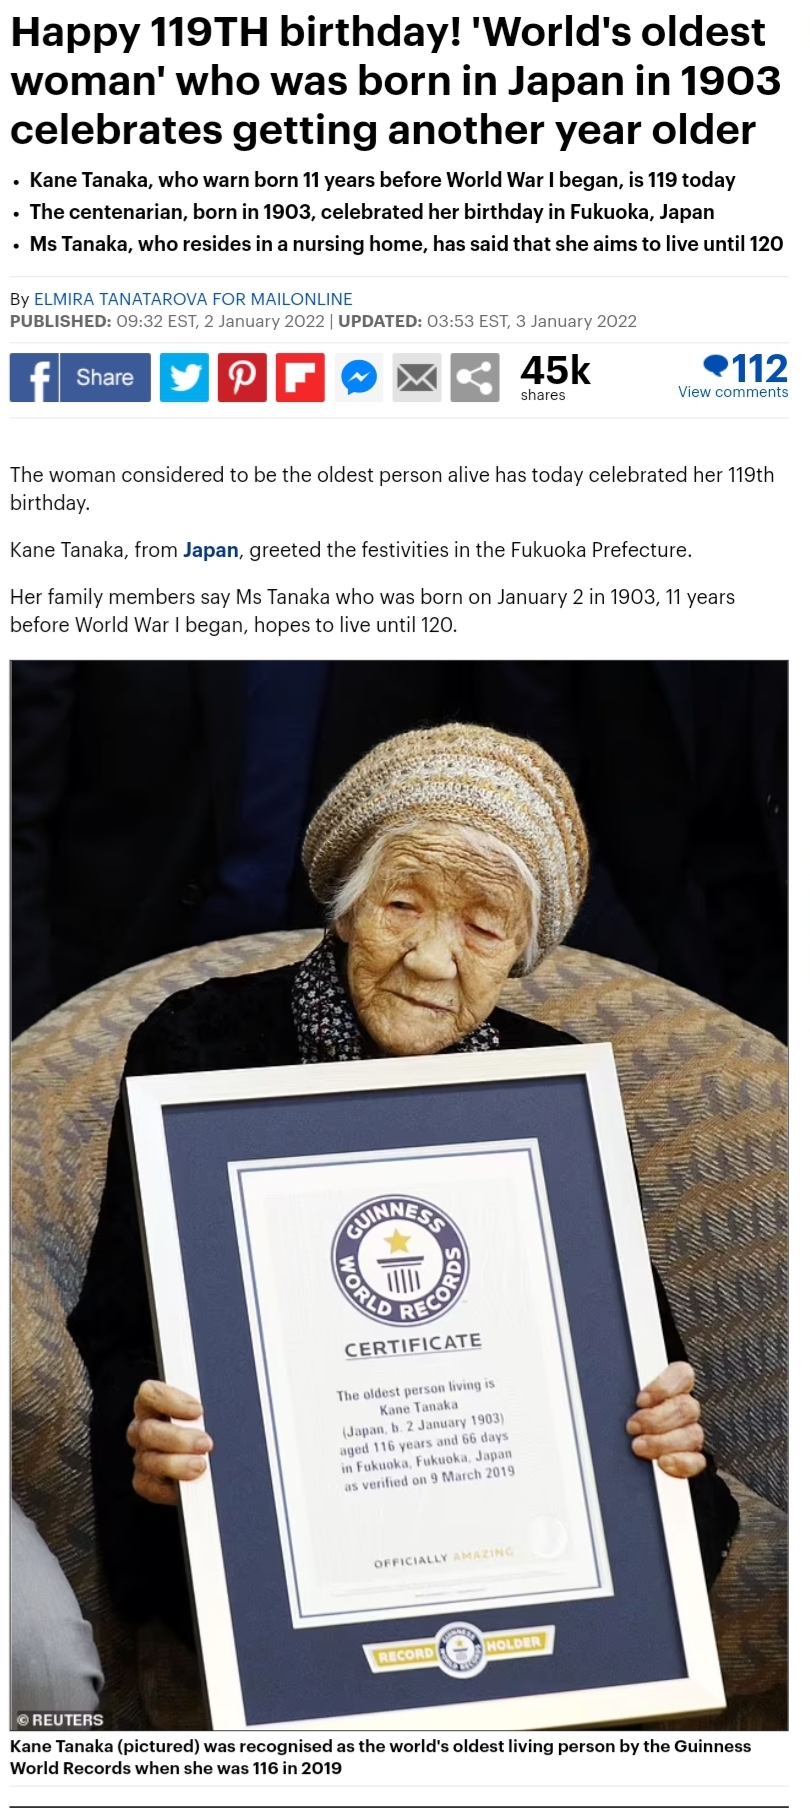 Tickled 119TH birthday! ‘World’s oldest lady’ who was as soon as born in Japan in 1903 celebrates getting one other year older